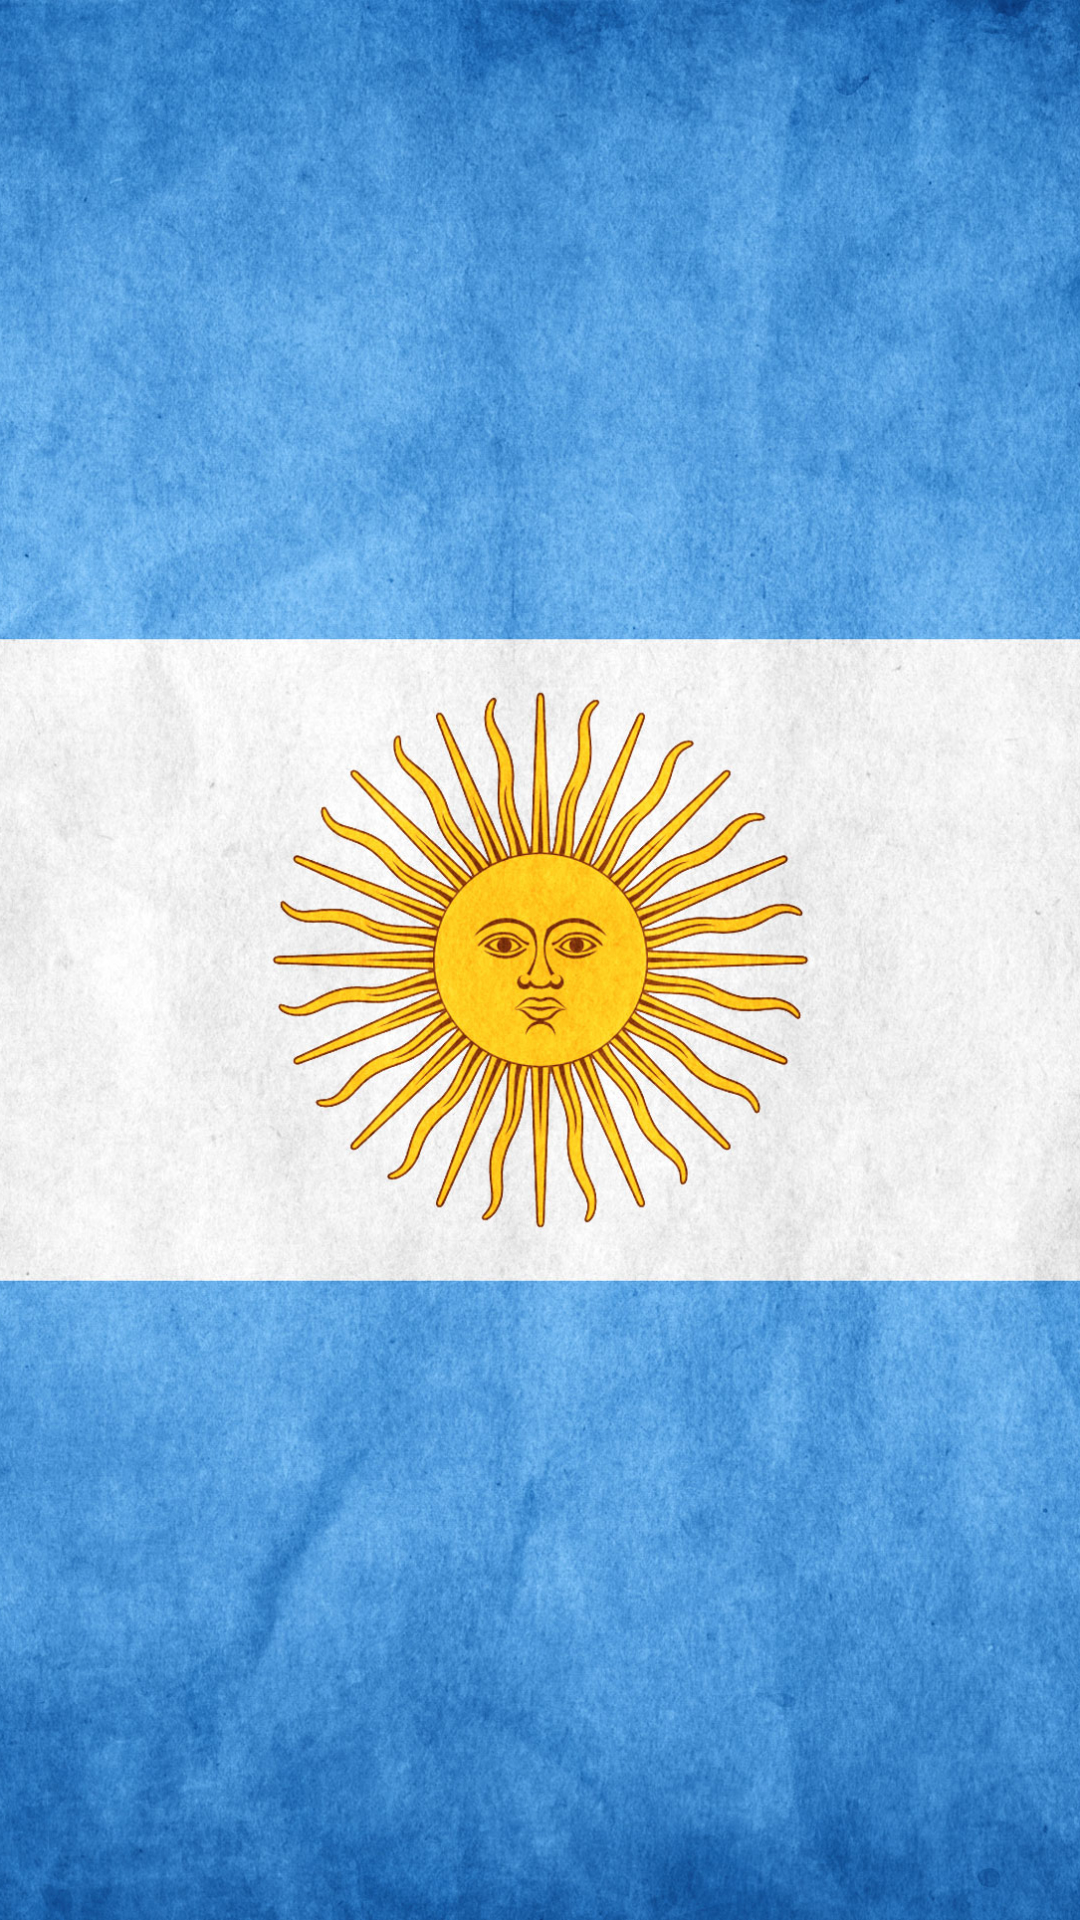 Mobile Wallpaper Flag Of Argentina Flags Argentina Misc 159203 Download The Picture For Free